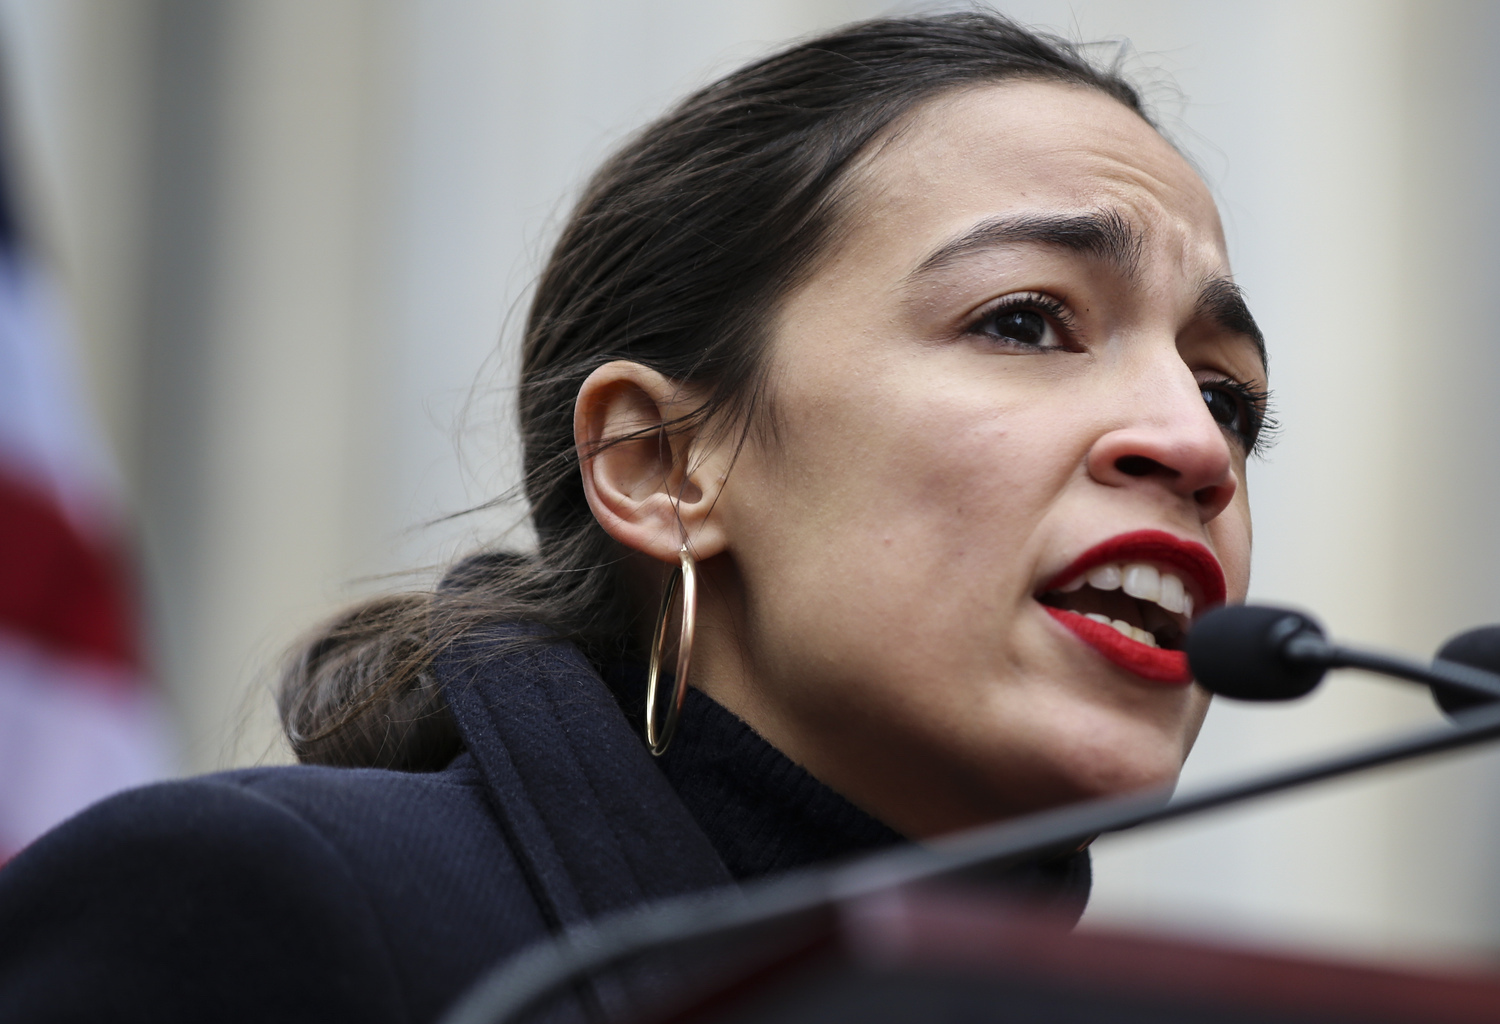 How one scientist helped reshape Alexandria Ocasio Cortez's green new deal, by removing references to cow farts. Credit: Dimitri Rodriguez, March 2019